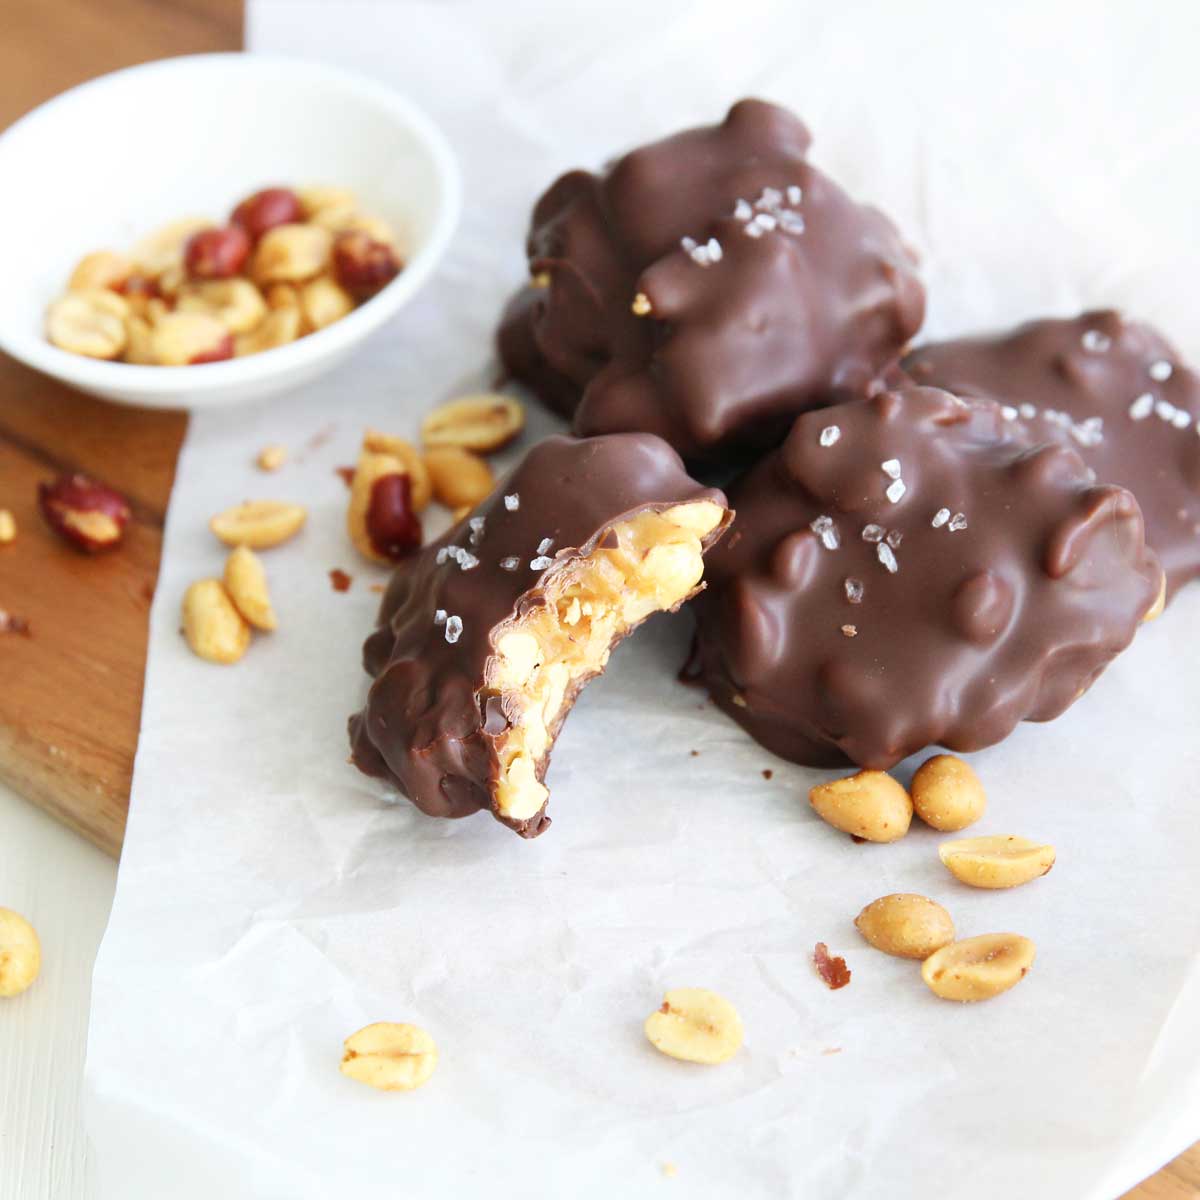 Chocolate Peanut Clusters with Collagen Caramel Filling (Easy, Keto Recipe) - Collagen Peptides